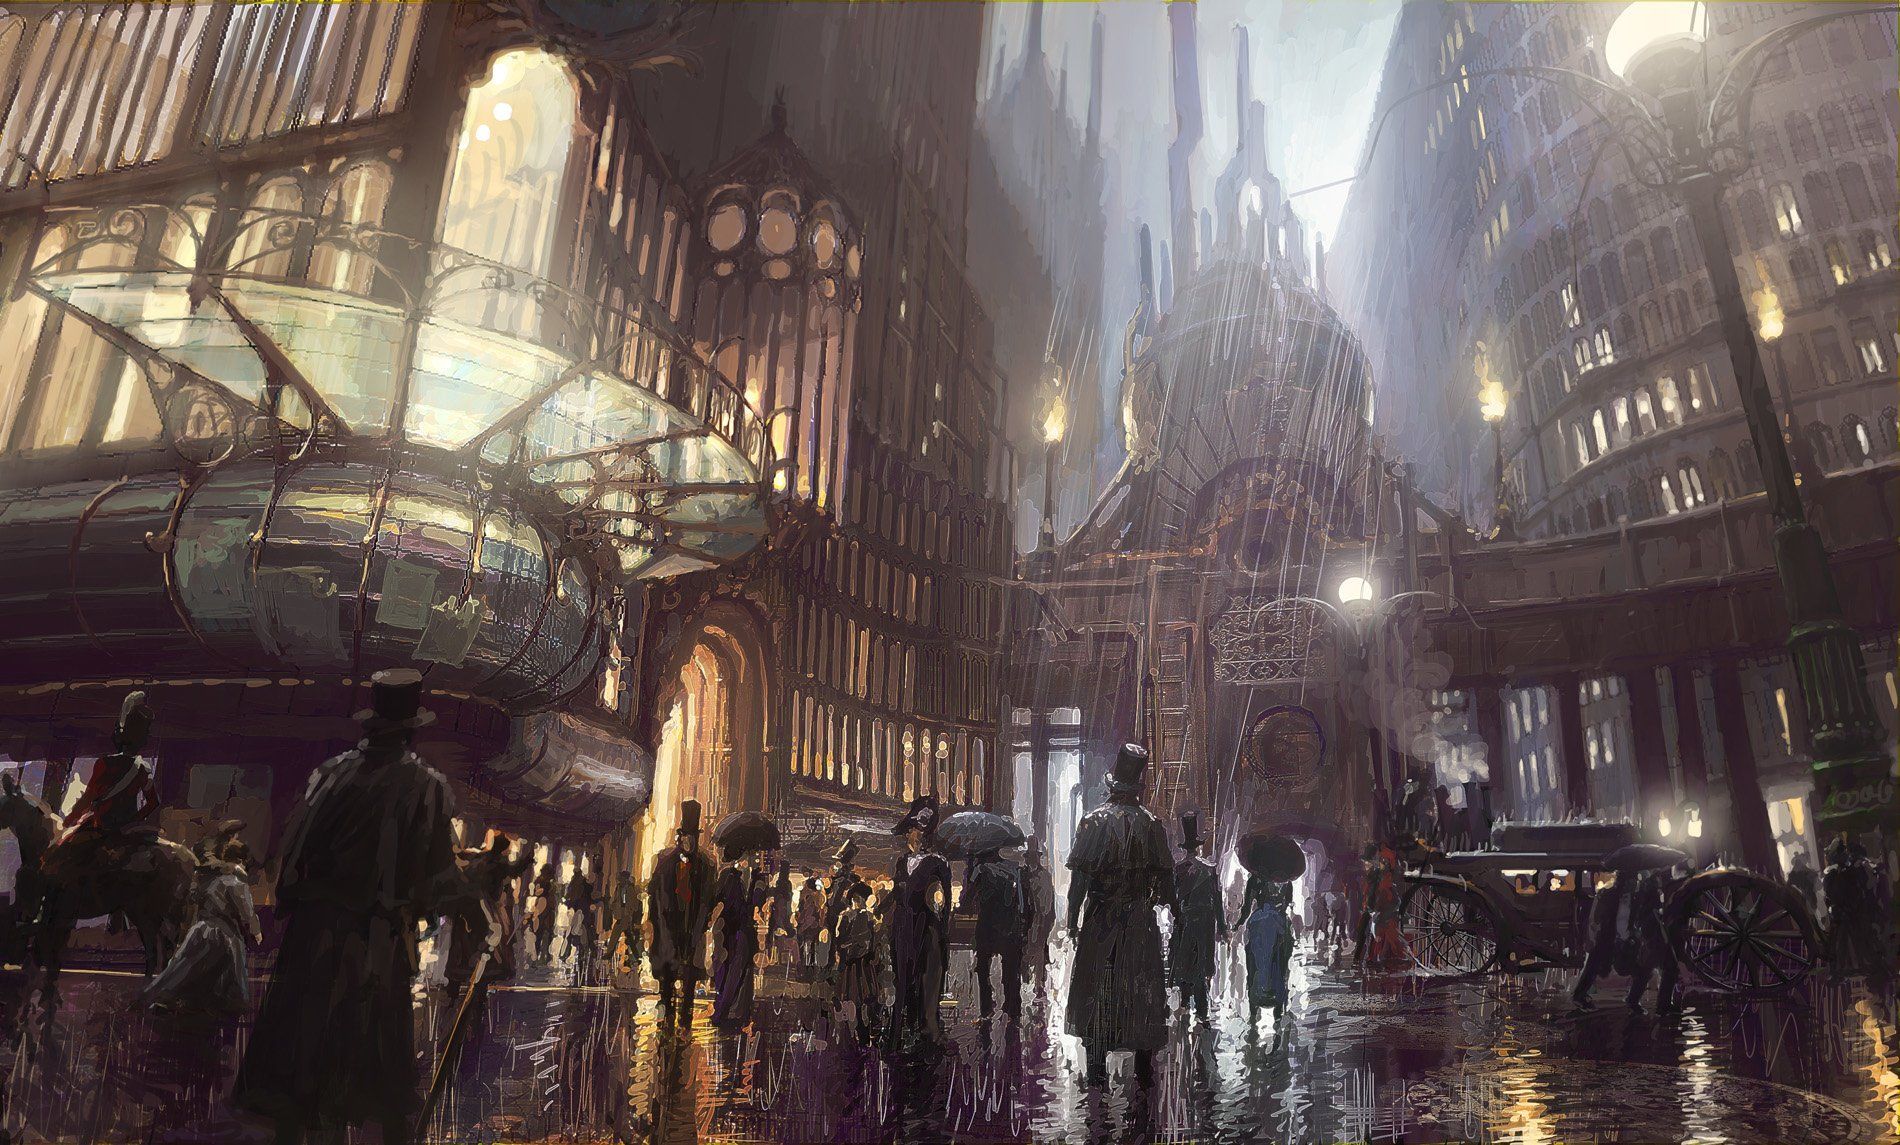 Concept art for the movie Blade Runner. - Steampunk